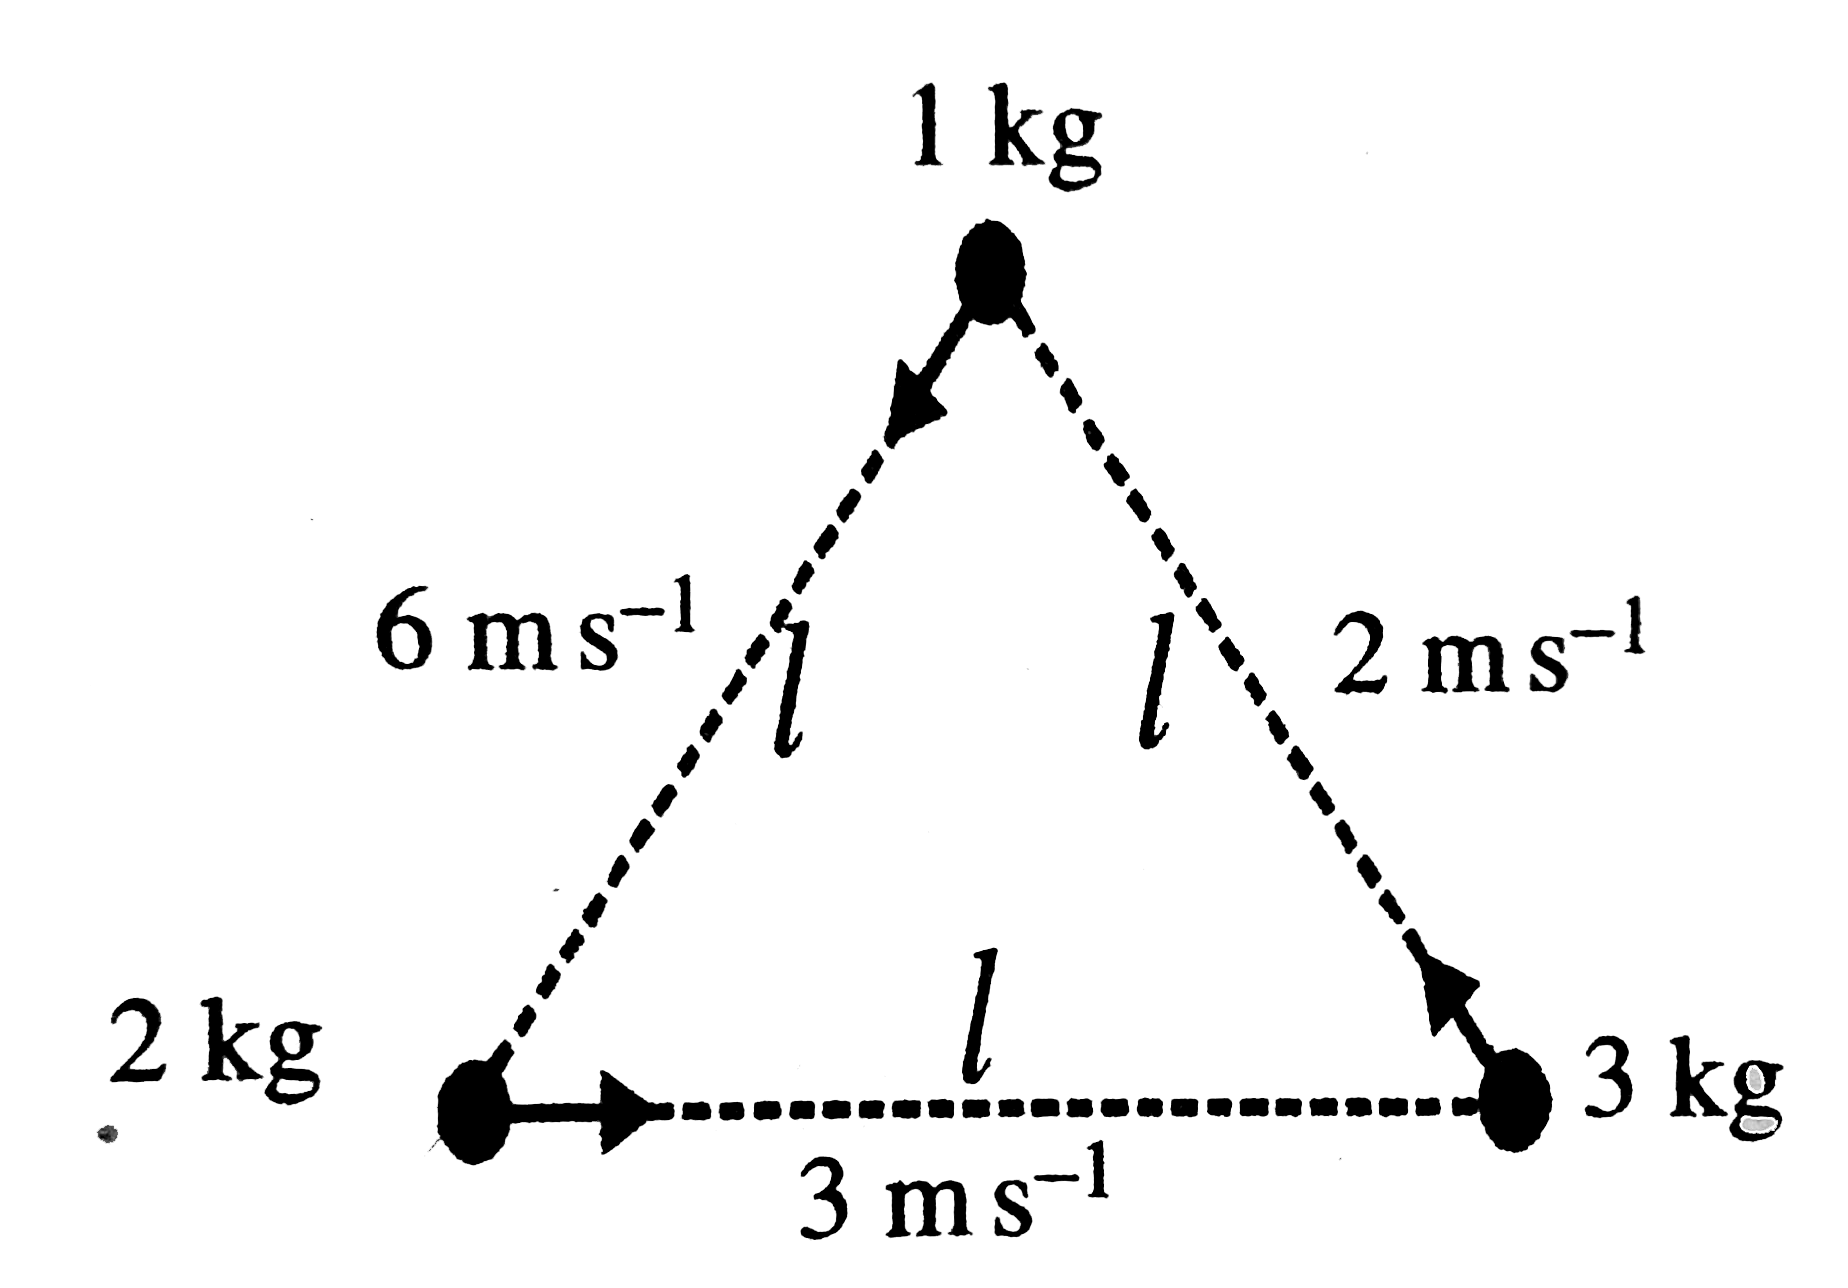 Three particles of masses 1 kg, 2 kg and 3 kg are situated at the corners of an equilateral triangle move at speed 6ms^(-1), 3ms^(-1) and 2ms^(-1) respectively. Each particle maintains a direction towards the particle at the next corner symmetrically. Find velocity of CM of the system at this instant